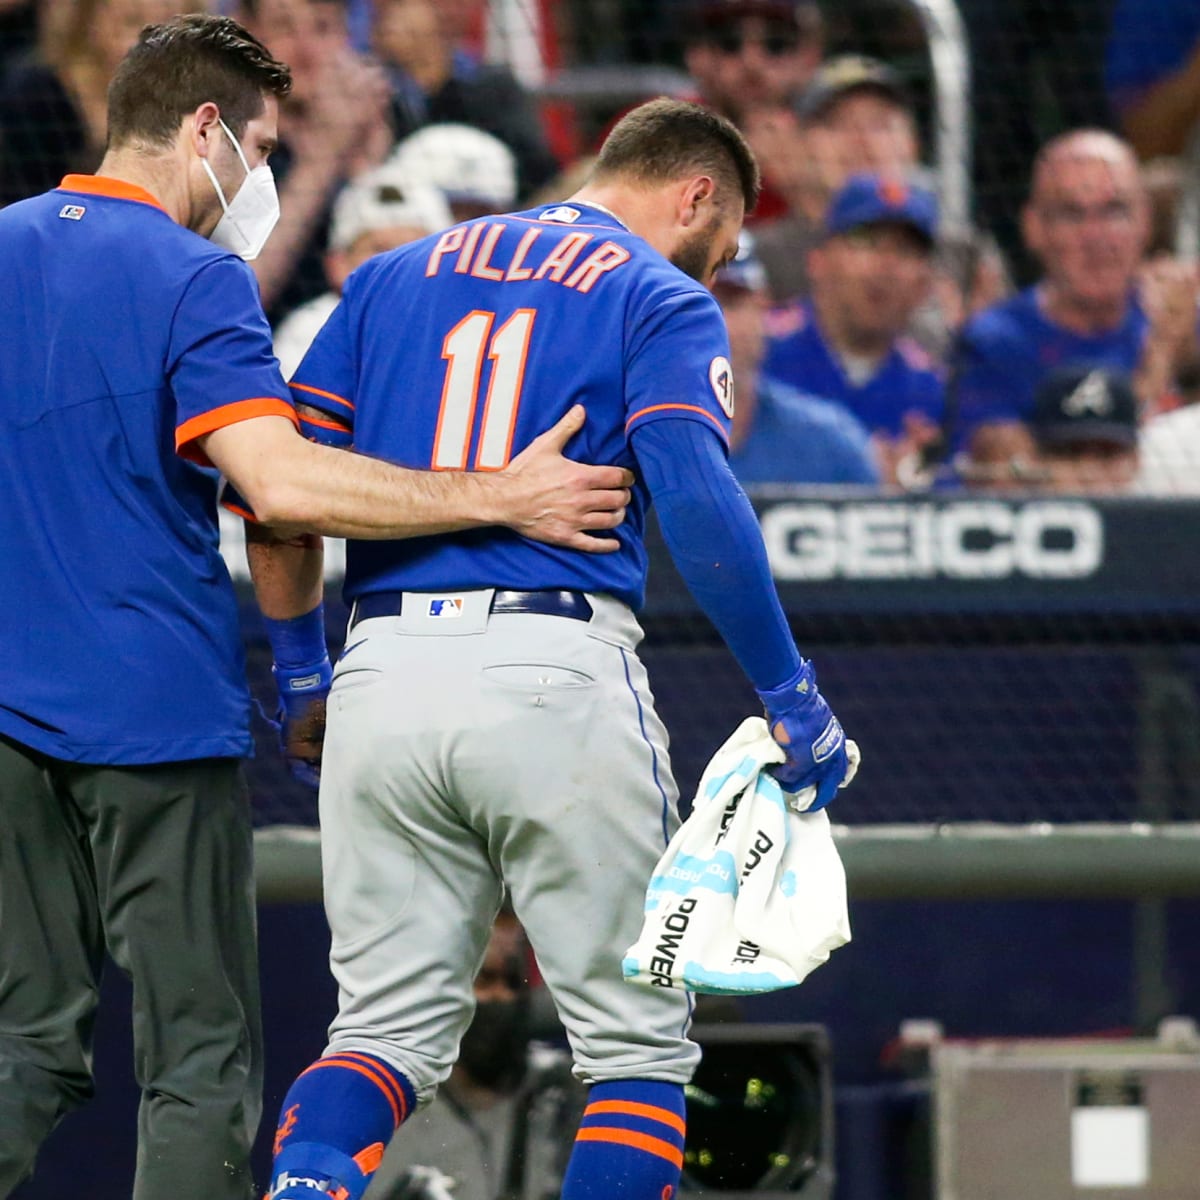 Kevin Pillar contemplating a change after getting drilled in face